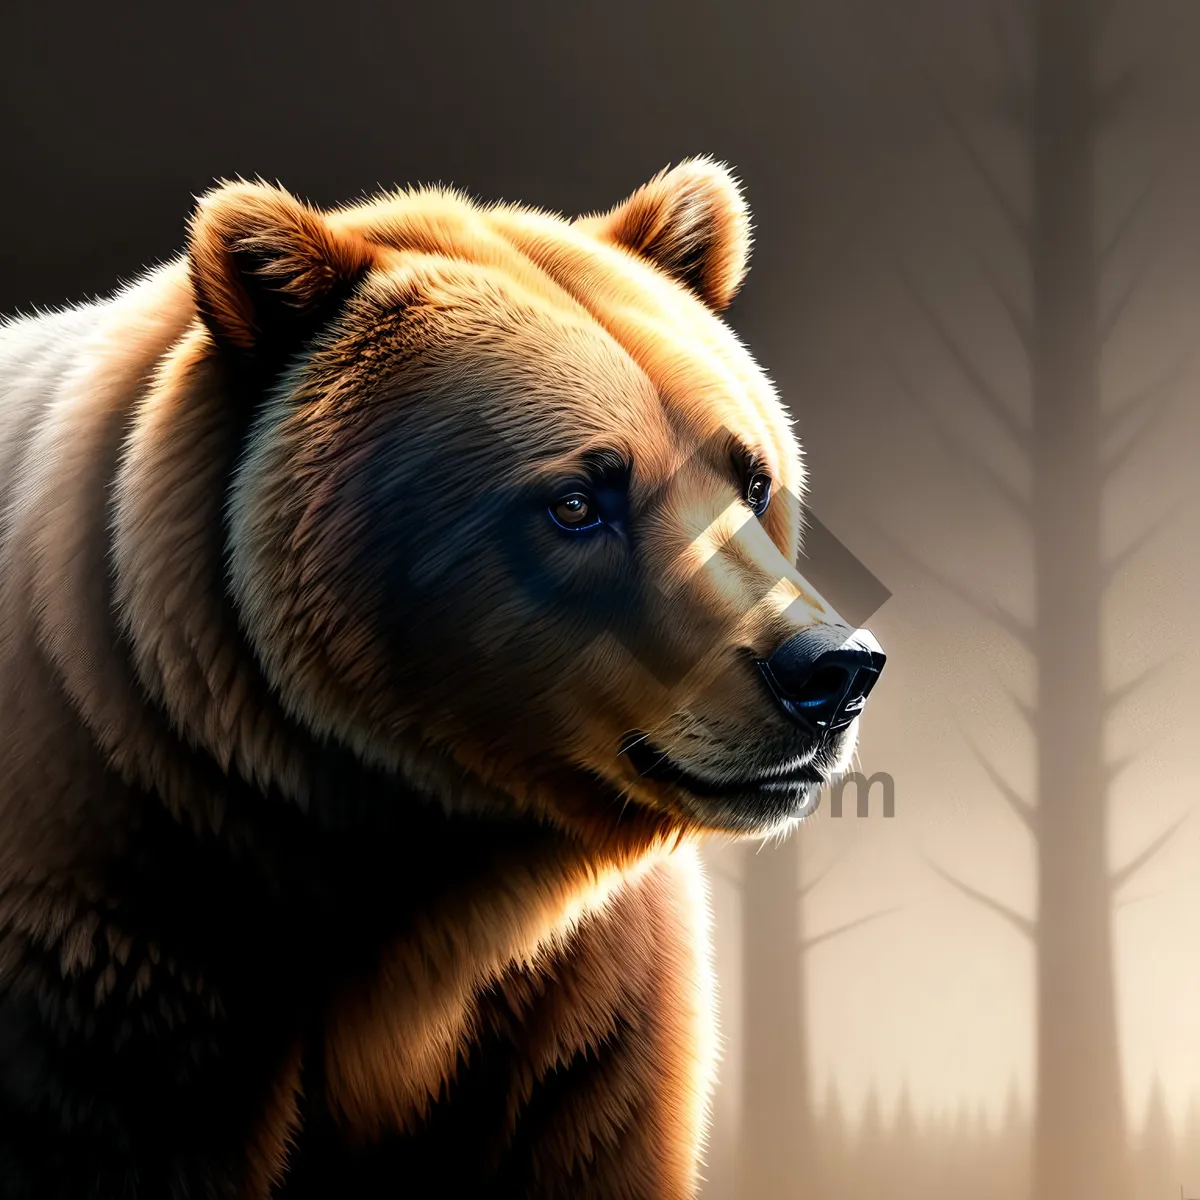 Picture of Furry Predator in Wild: Brown Bear